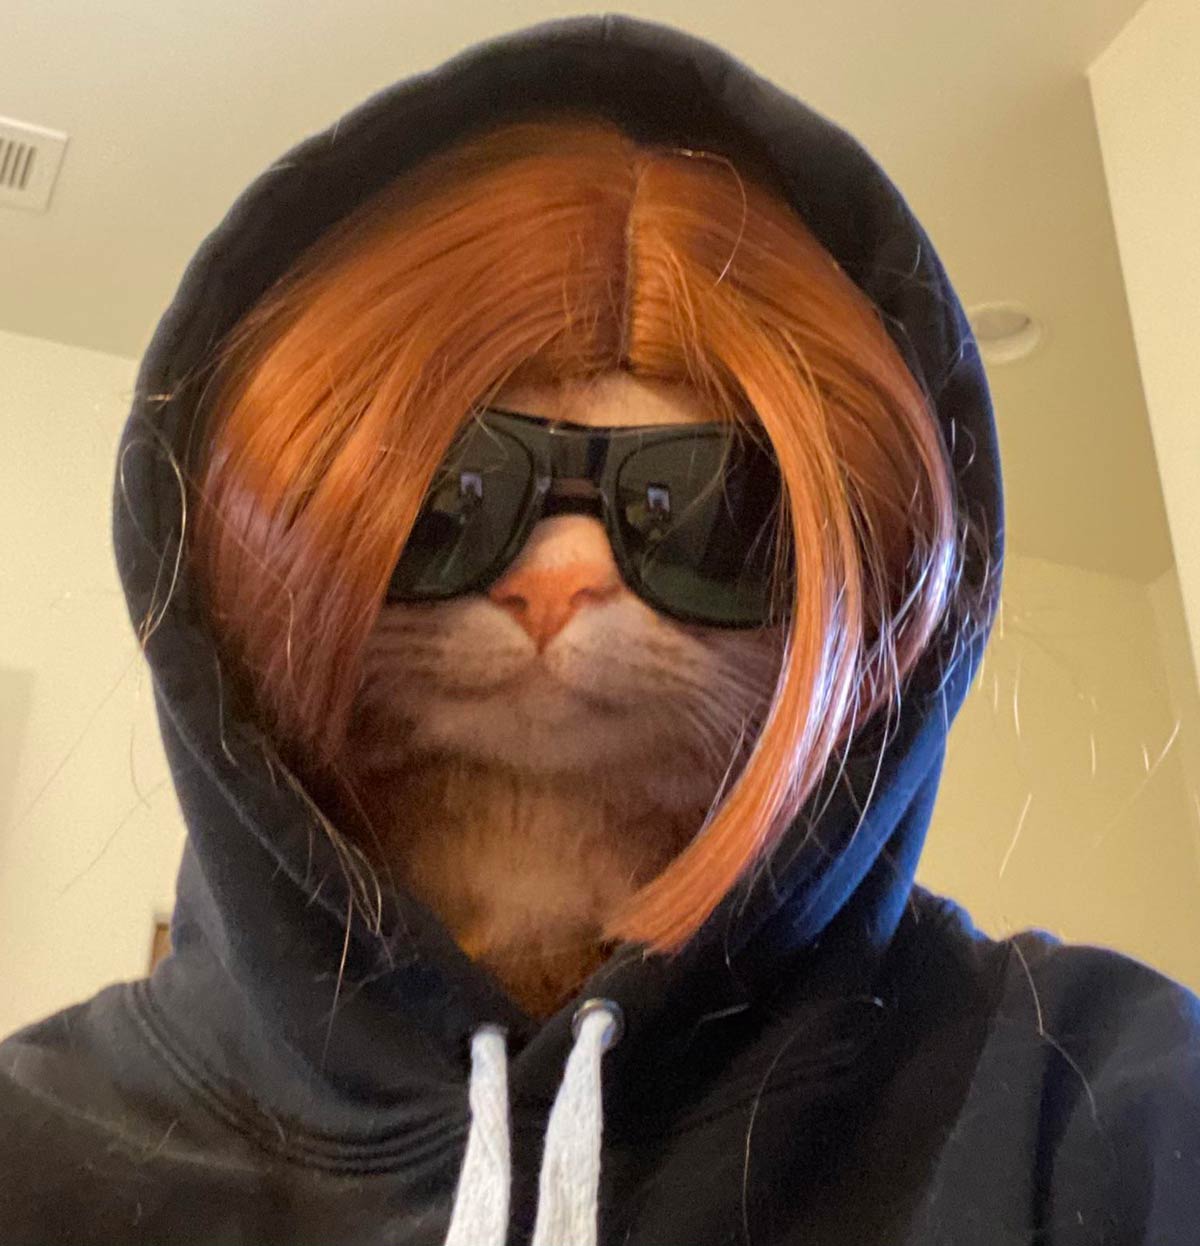 Garfield wants to speak to the manager